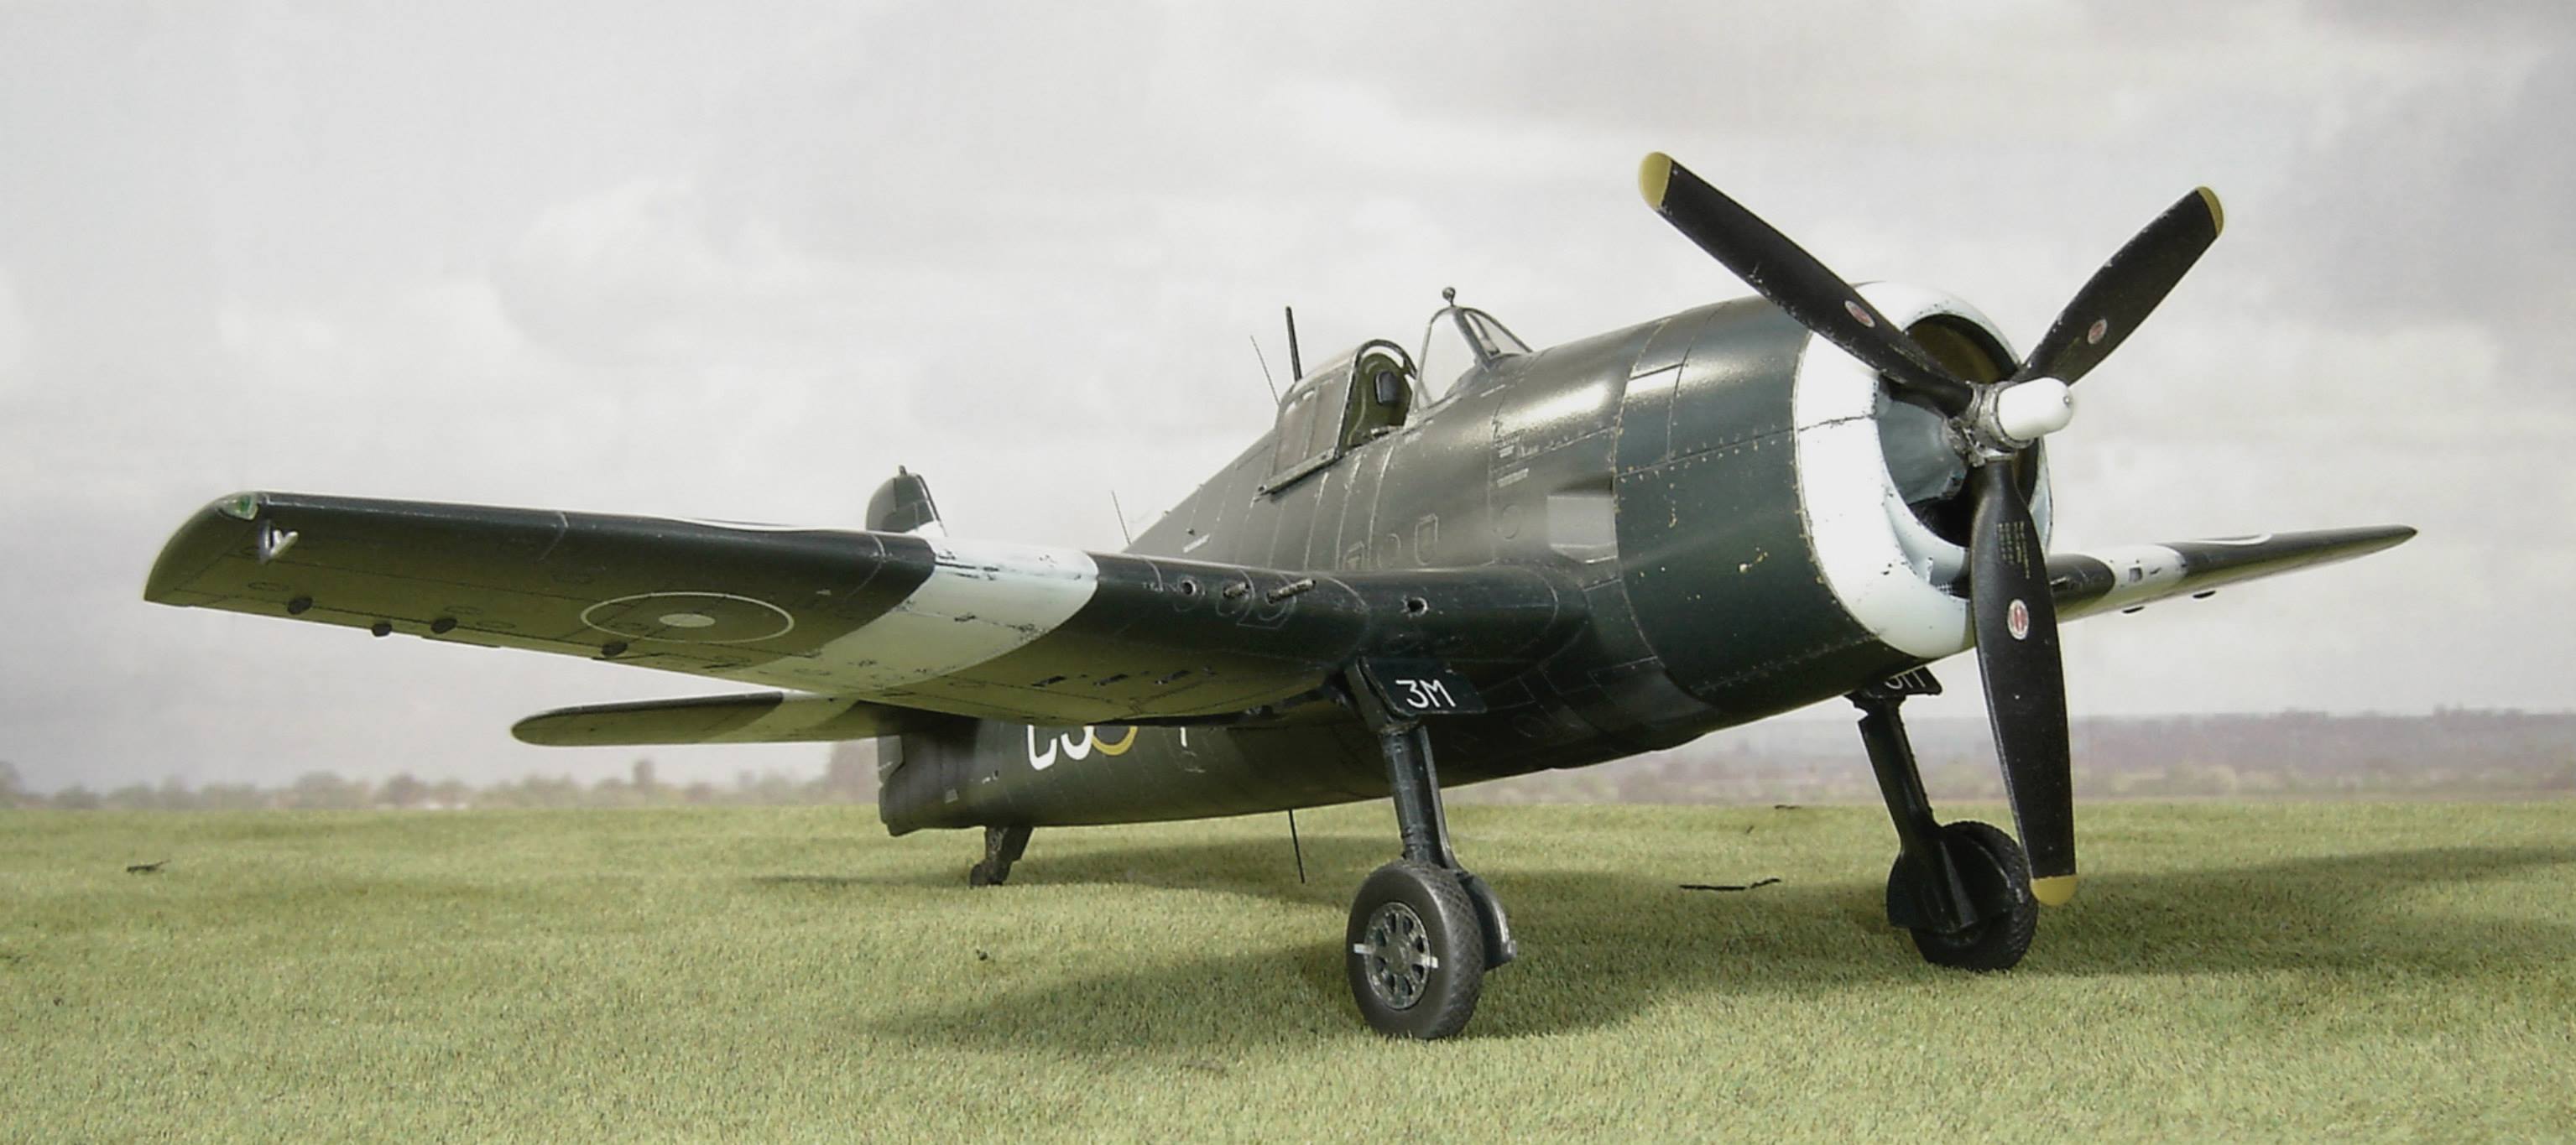 Grumman Hellcat Mk II JZ931 'C3-M' of 800 squadron, SEAC, at Trincomalee in October 1945. Kit is in 1/48th scale by Eduard.